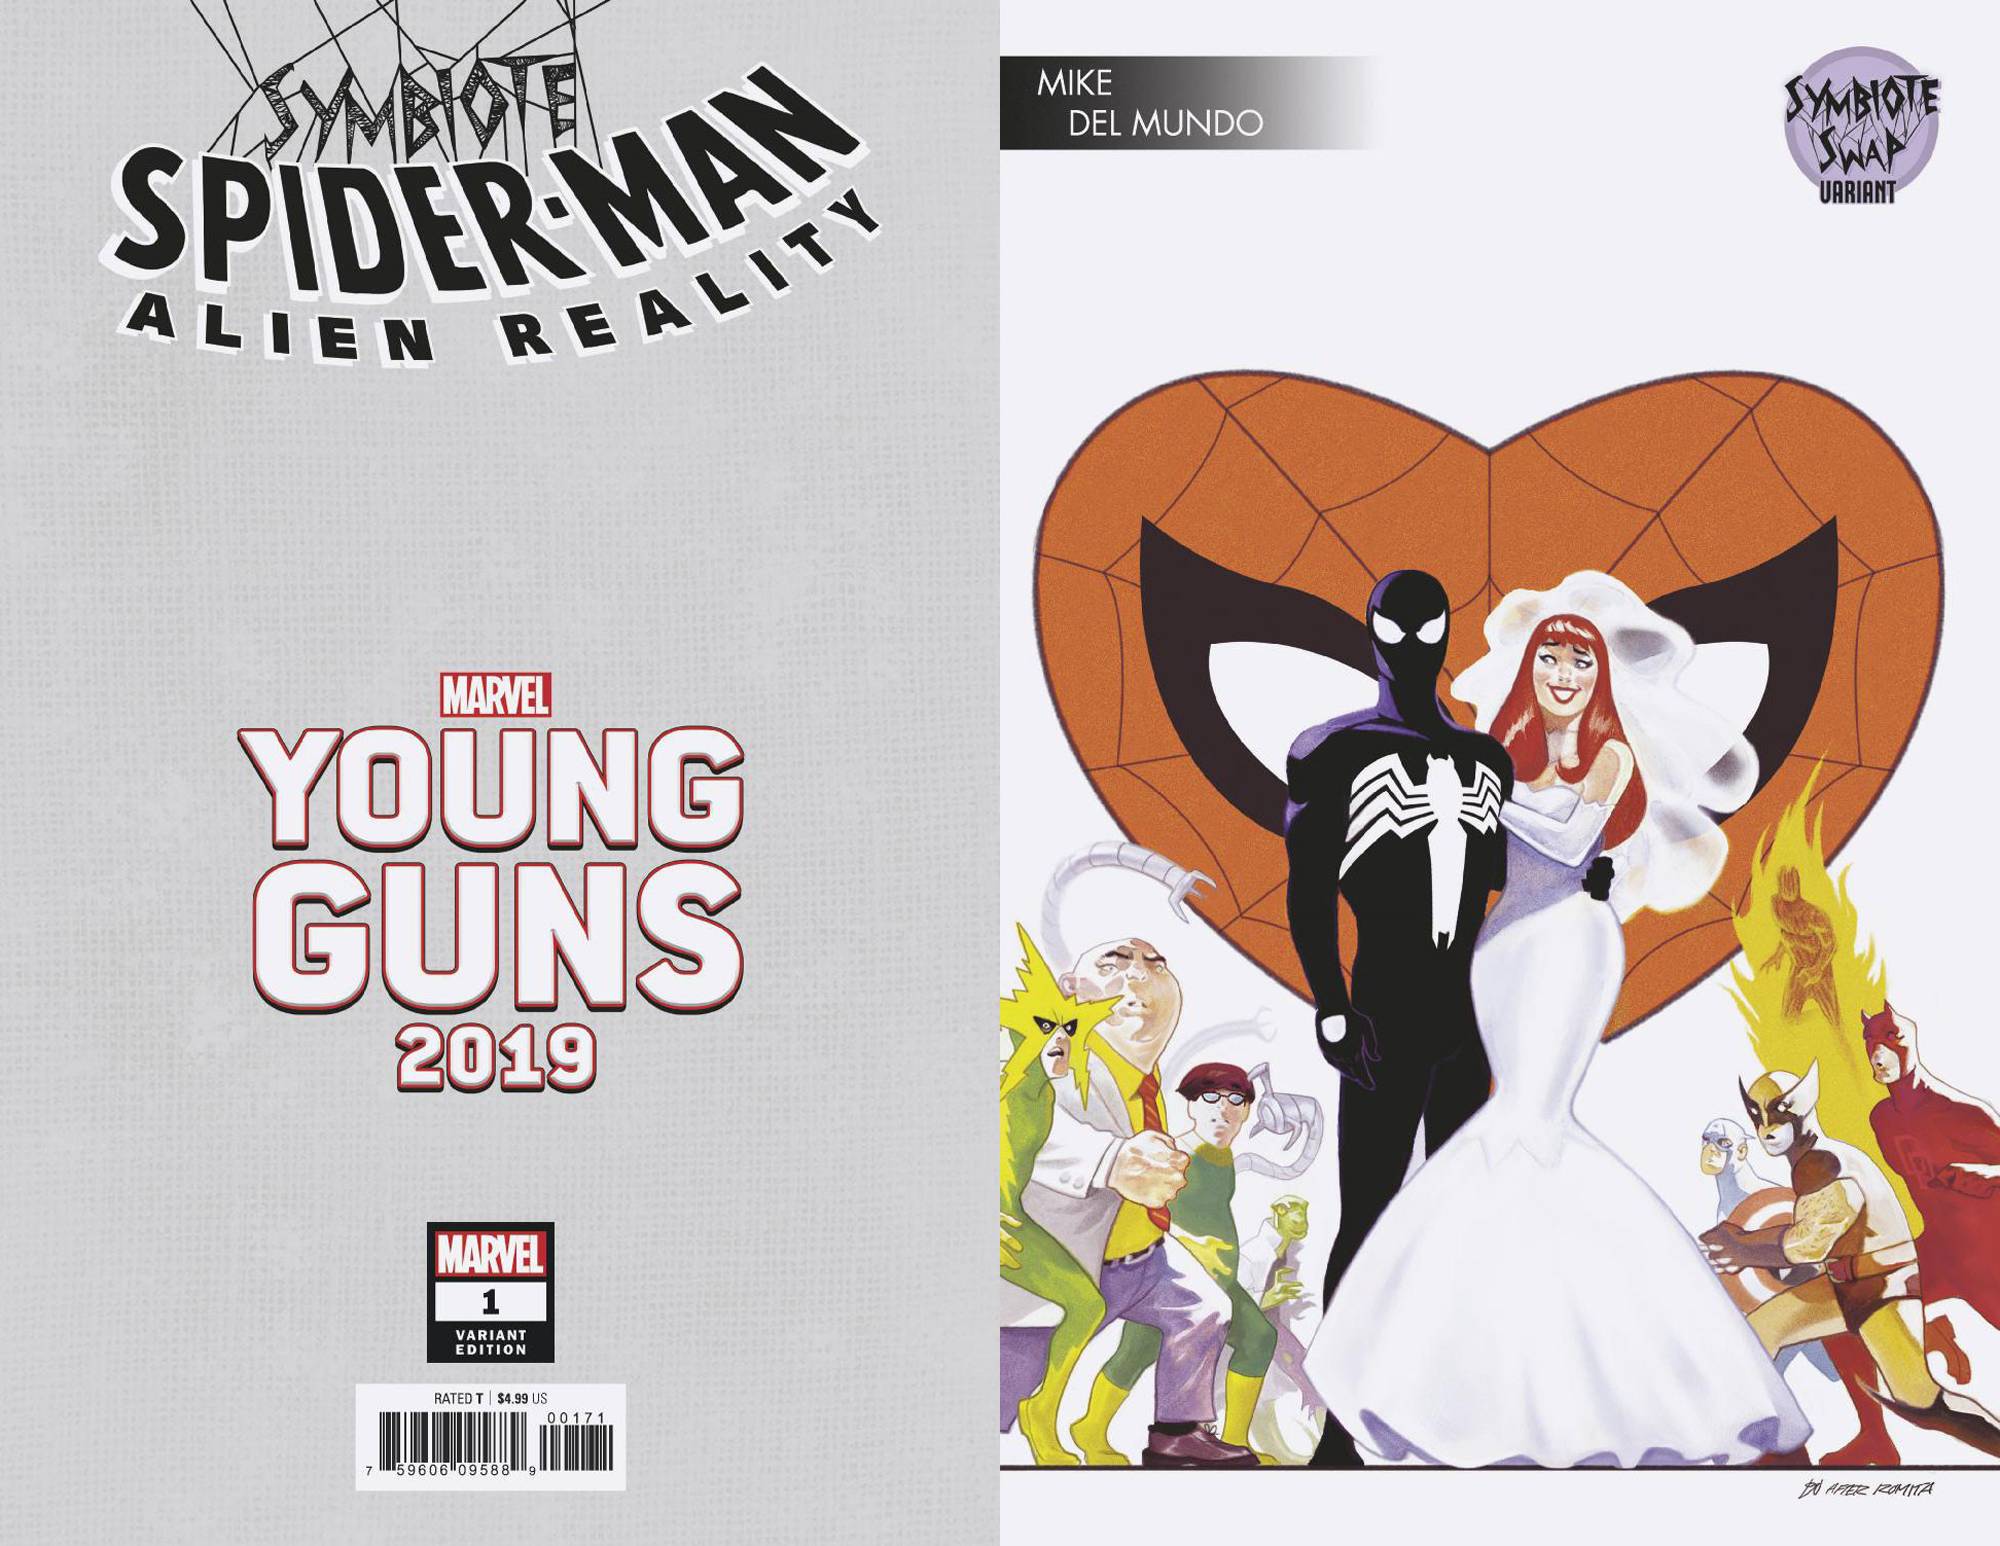 Symbiote Spider-Man Alien Reality #1 Del Mundo Young Guns Variant (Of 5)